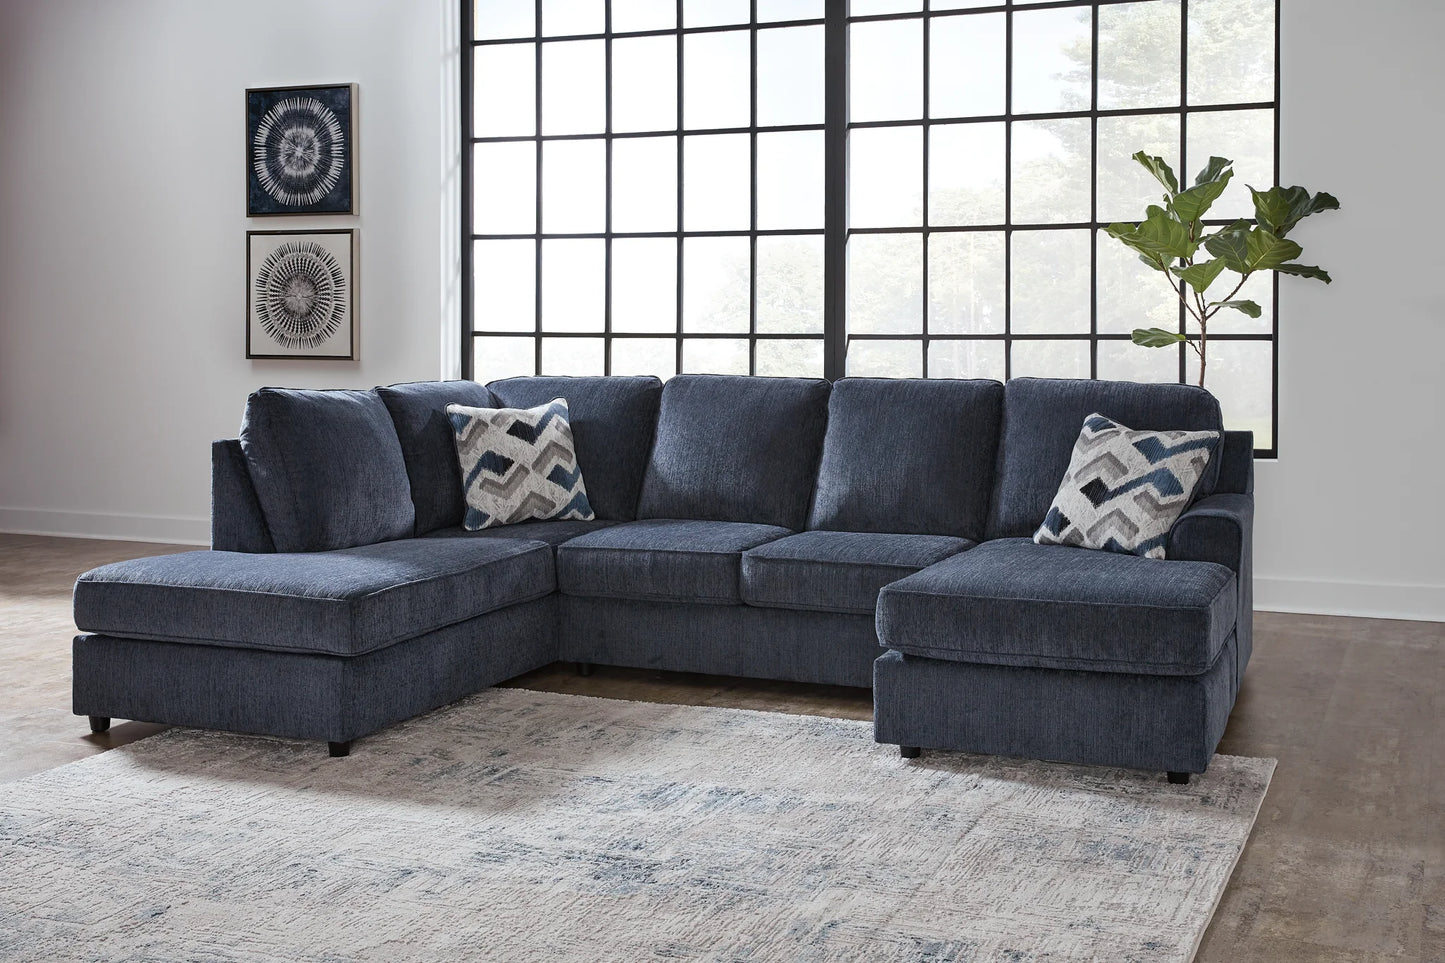 Albar Place - Cobalt - 2-Piece Sectional With Raf Sofa Chaise